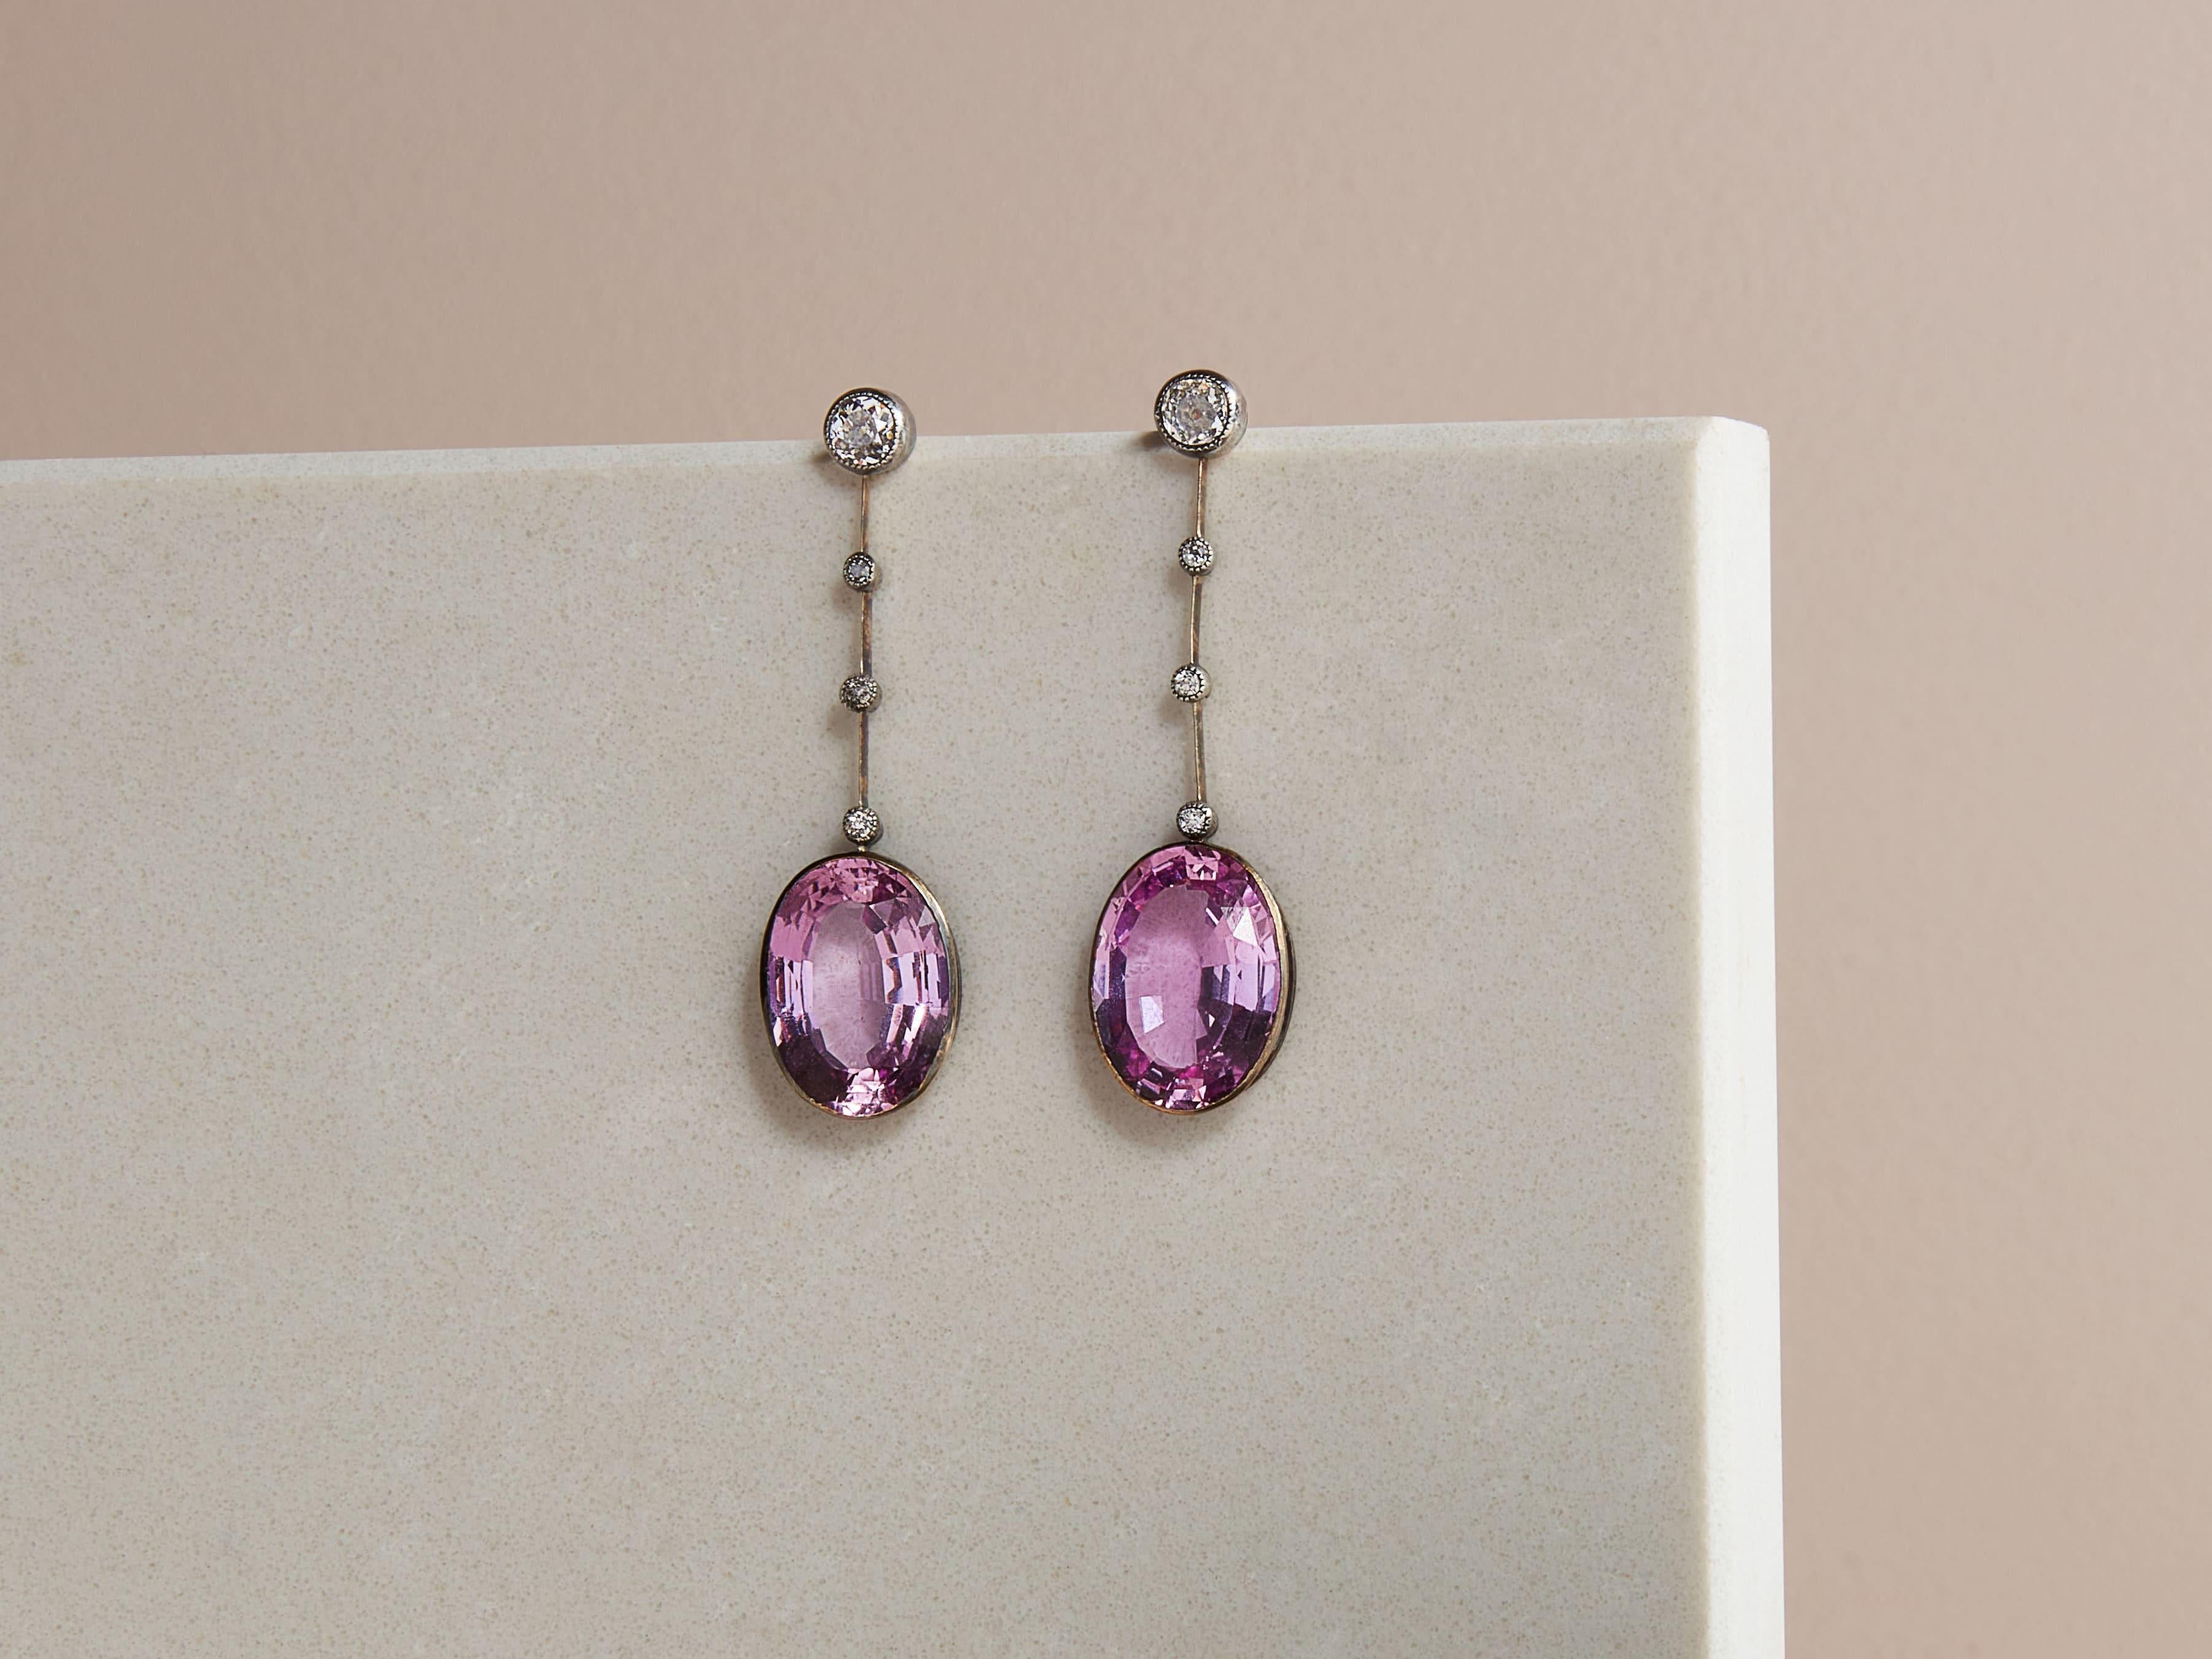 Genuine rarity and breathtaking beauty best describe these Belle Époque earrings featuring a pair of perfectly matched cyclamen coloured pink topaz.
Topaz is found in a variety of colours. But, the rarest and most coveted are pink, fine golden